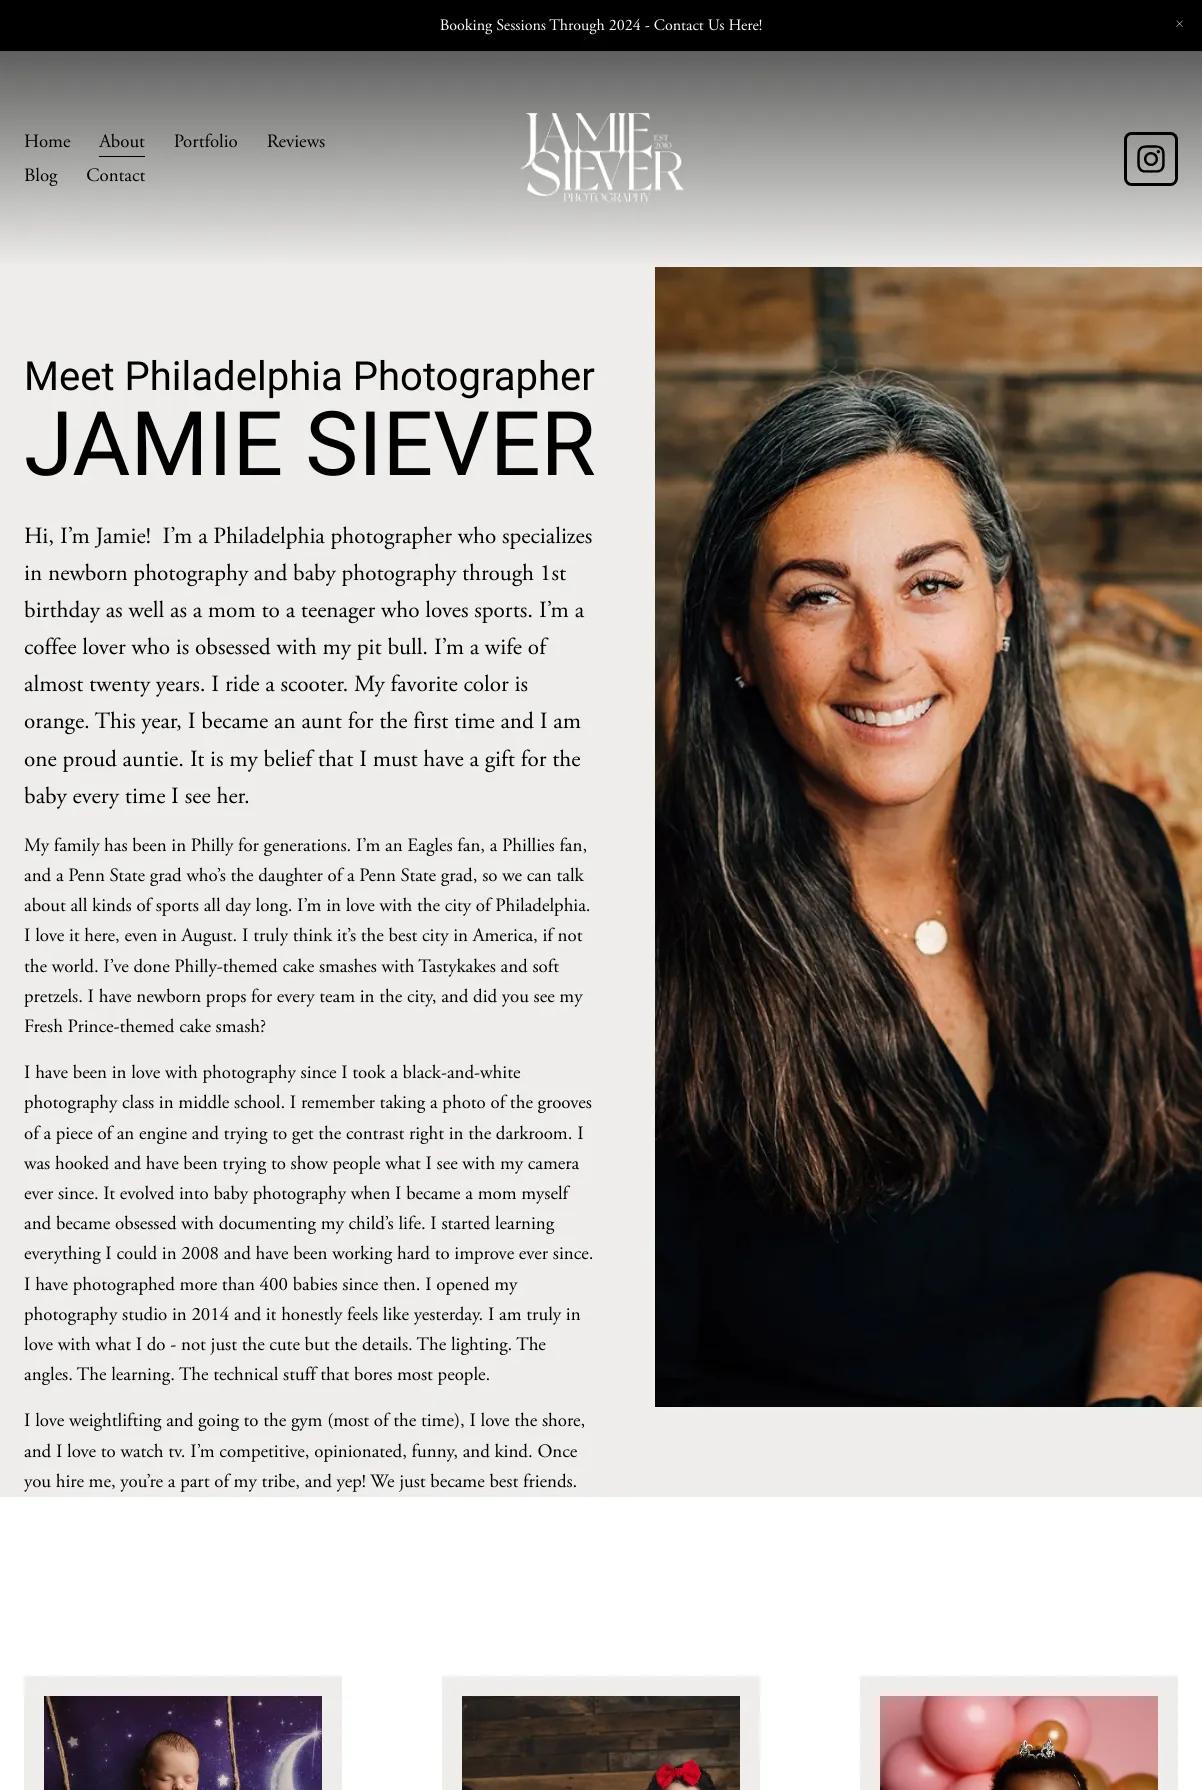 Screenshot 2 of Jamie Siever Photography (Example Squarespace Photography Website)